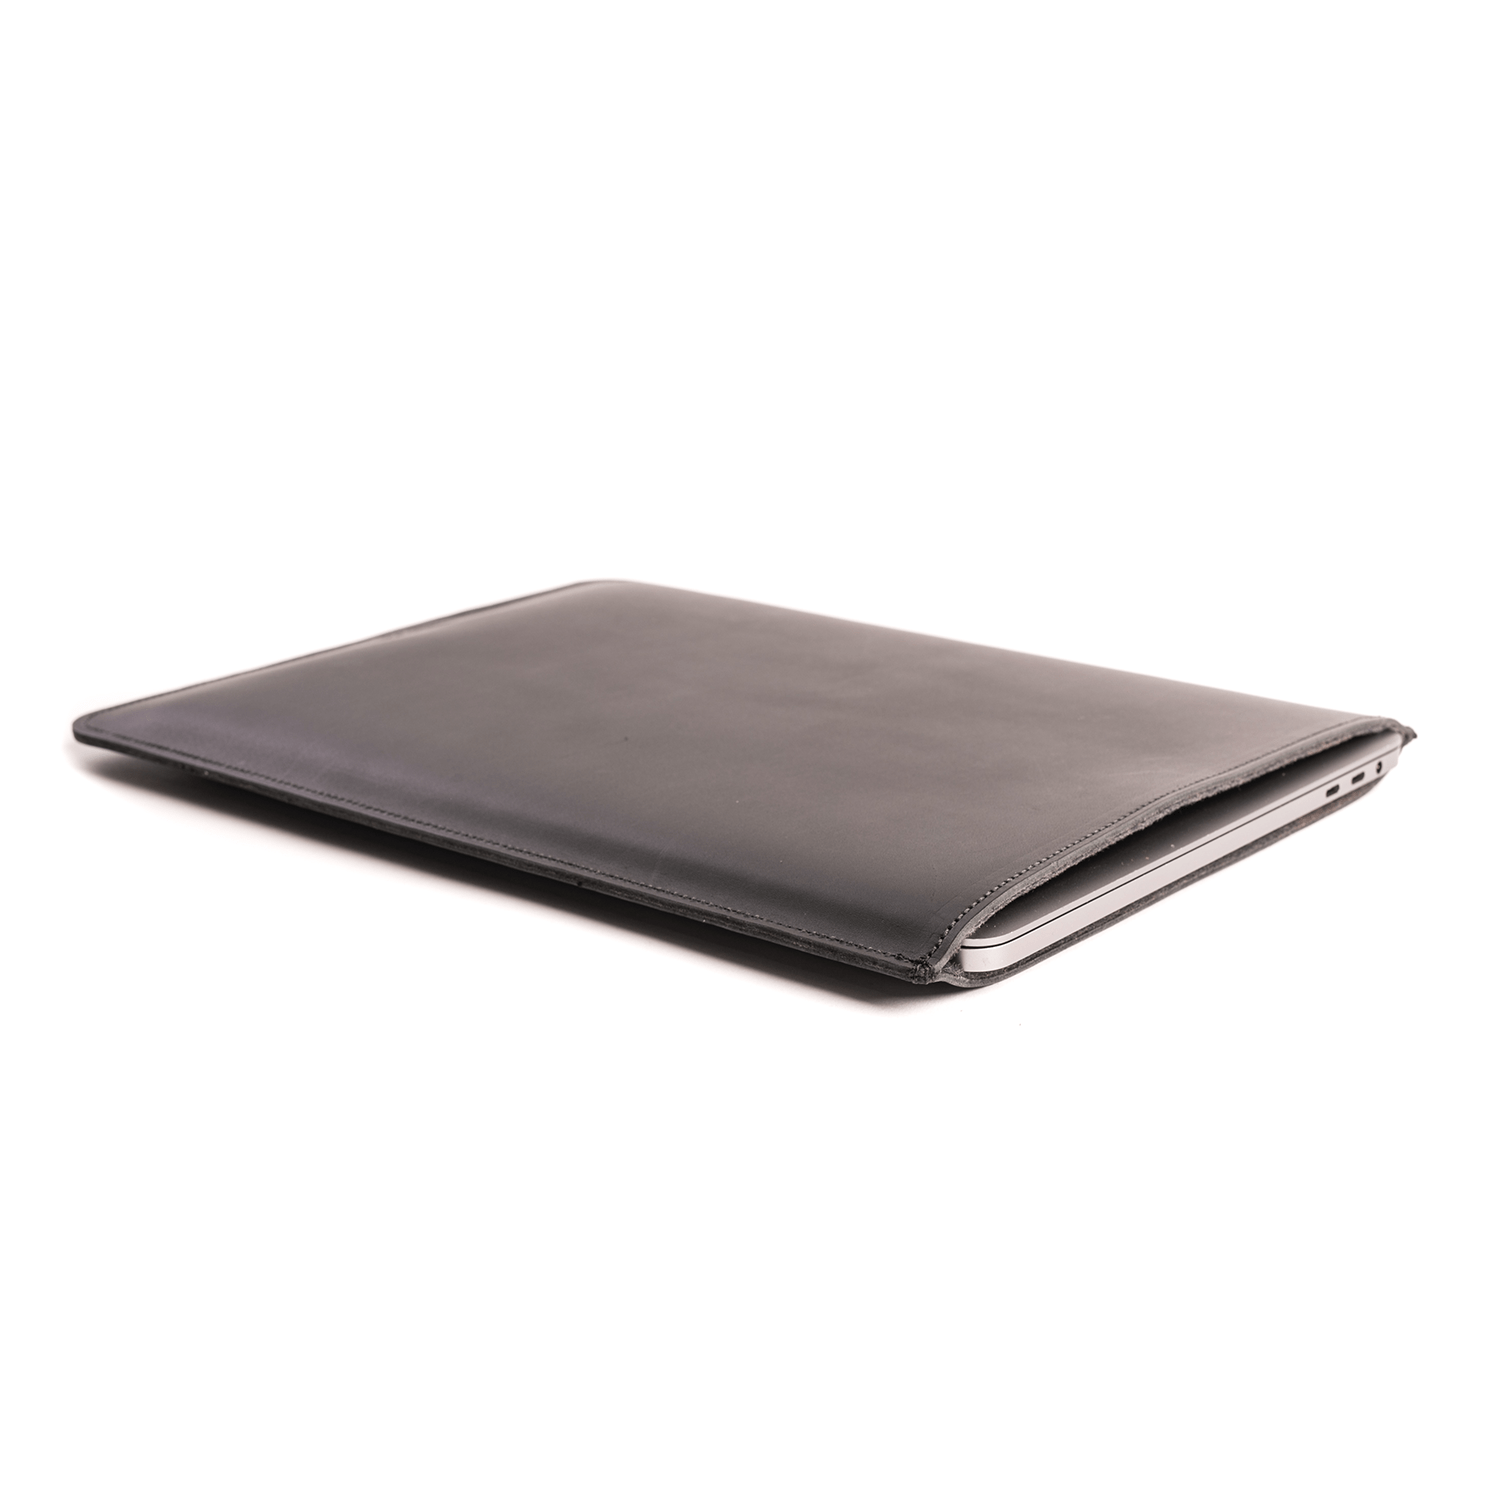 Leather MacBook Sleeve | Vertical | Leather MacBook Air/Pro Cases ...